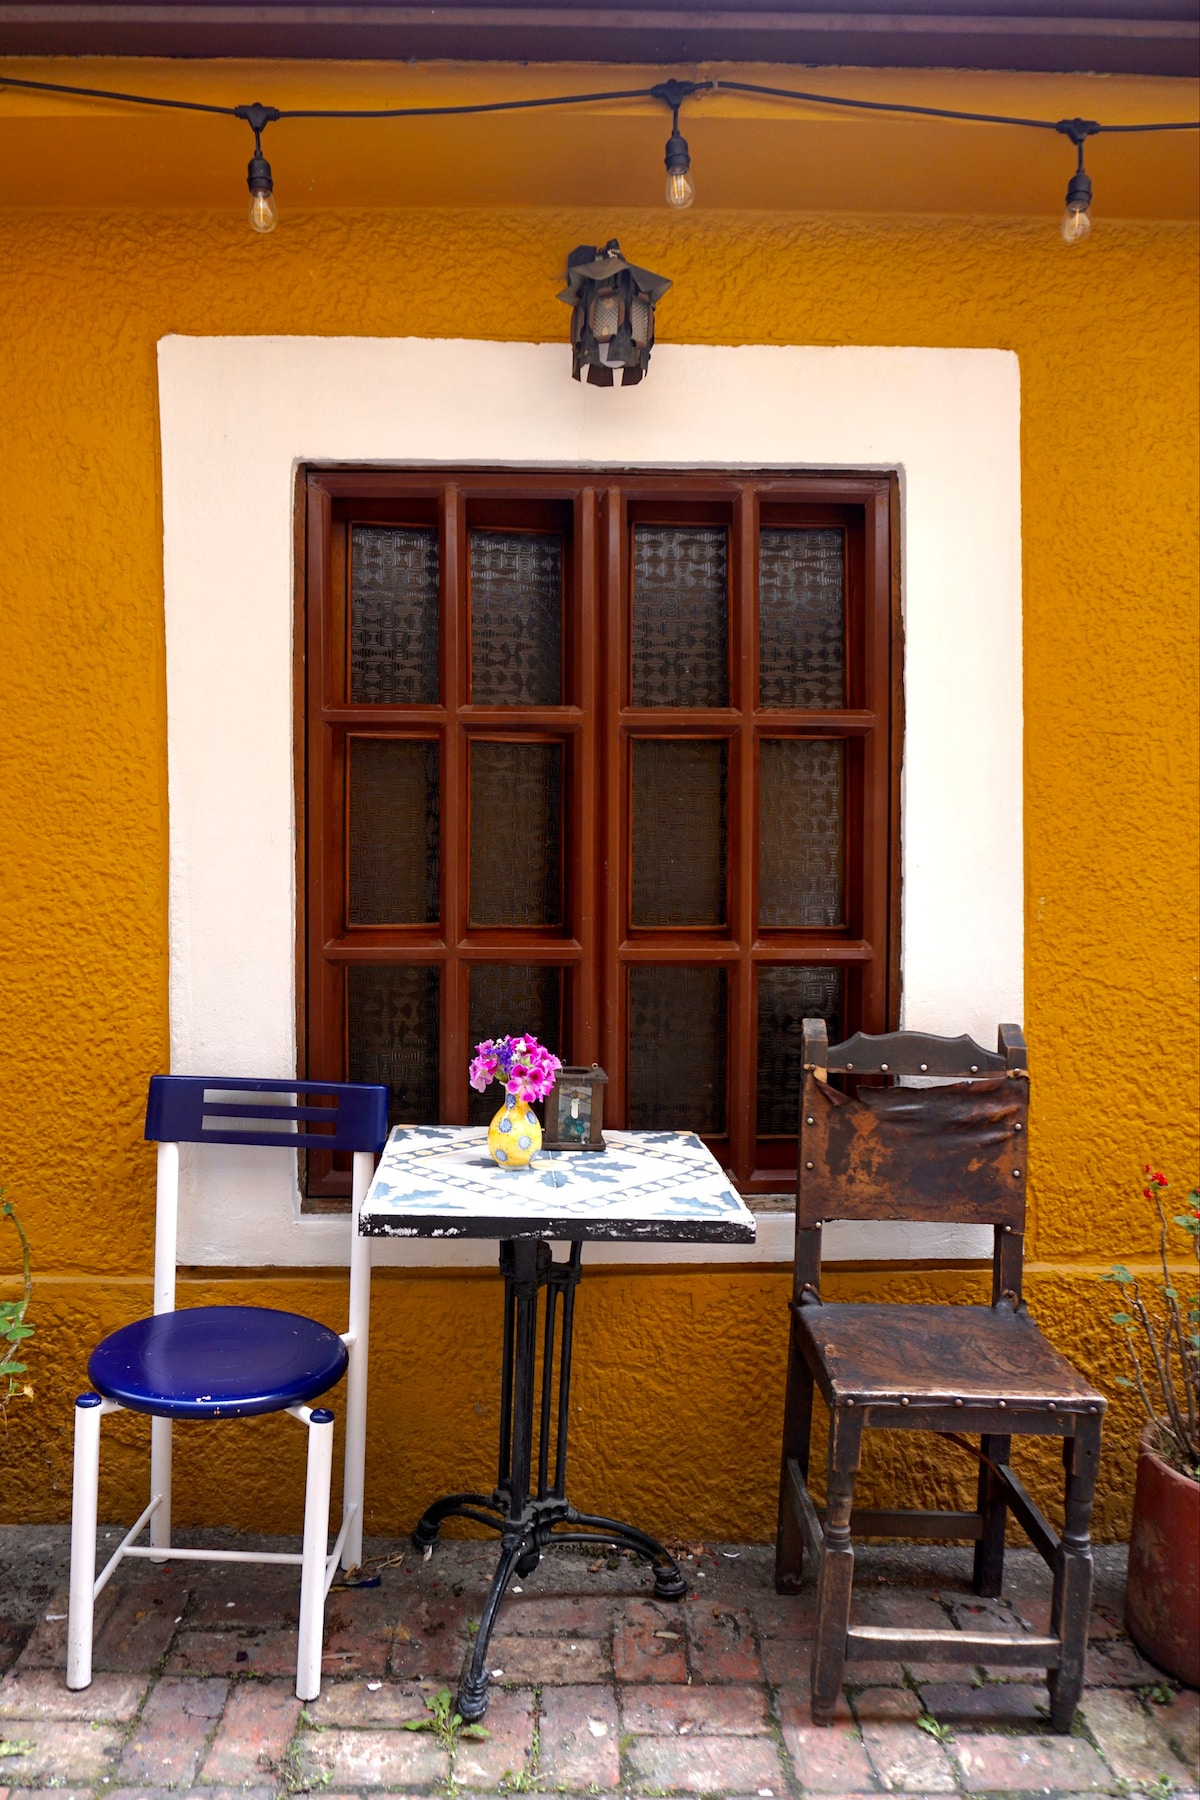 "Charming private house in Historic Usaquén